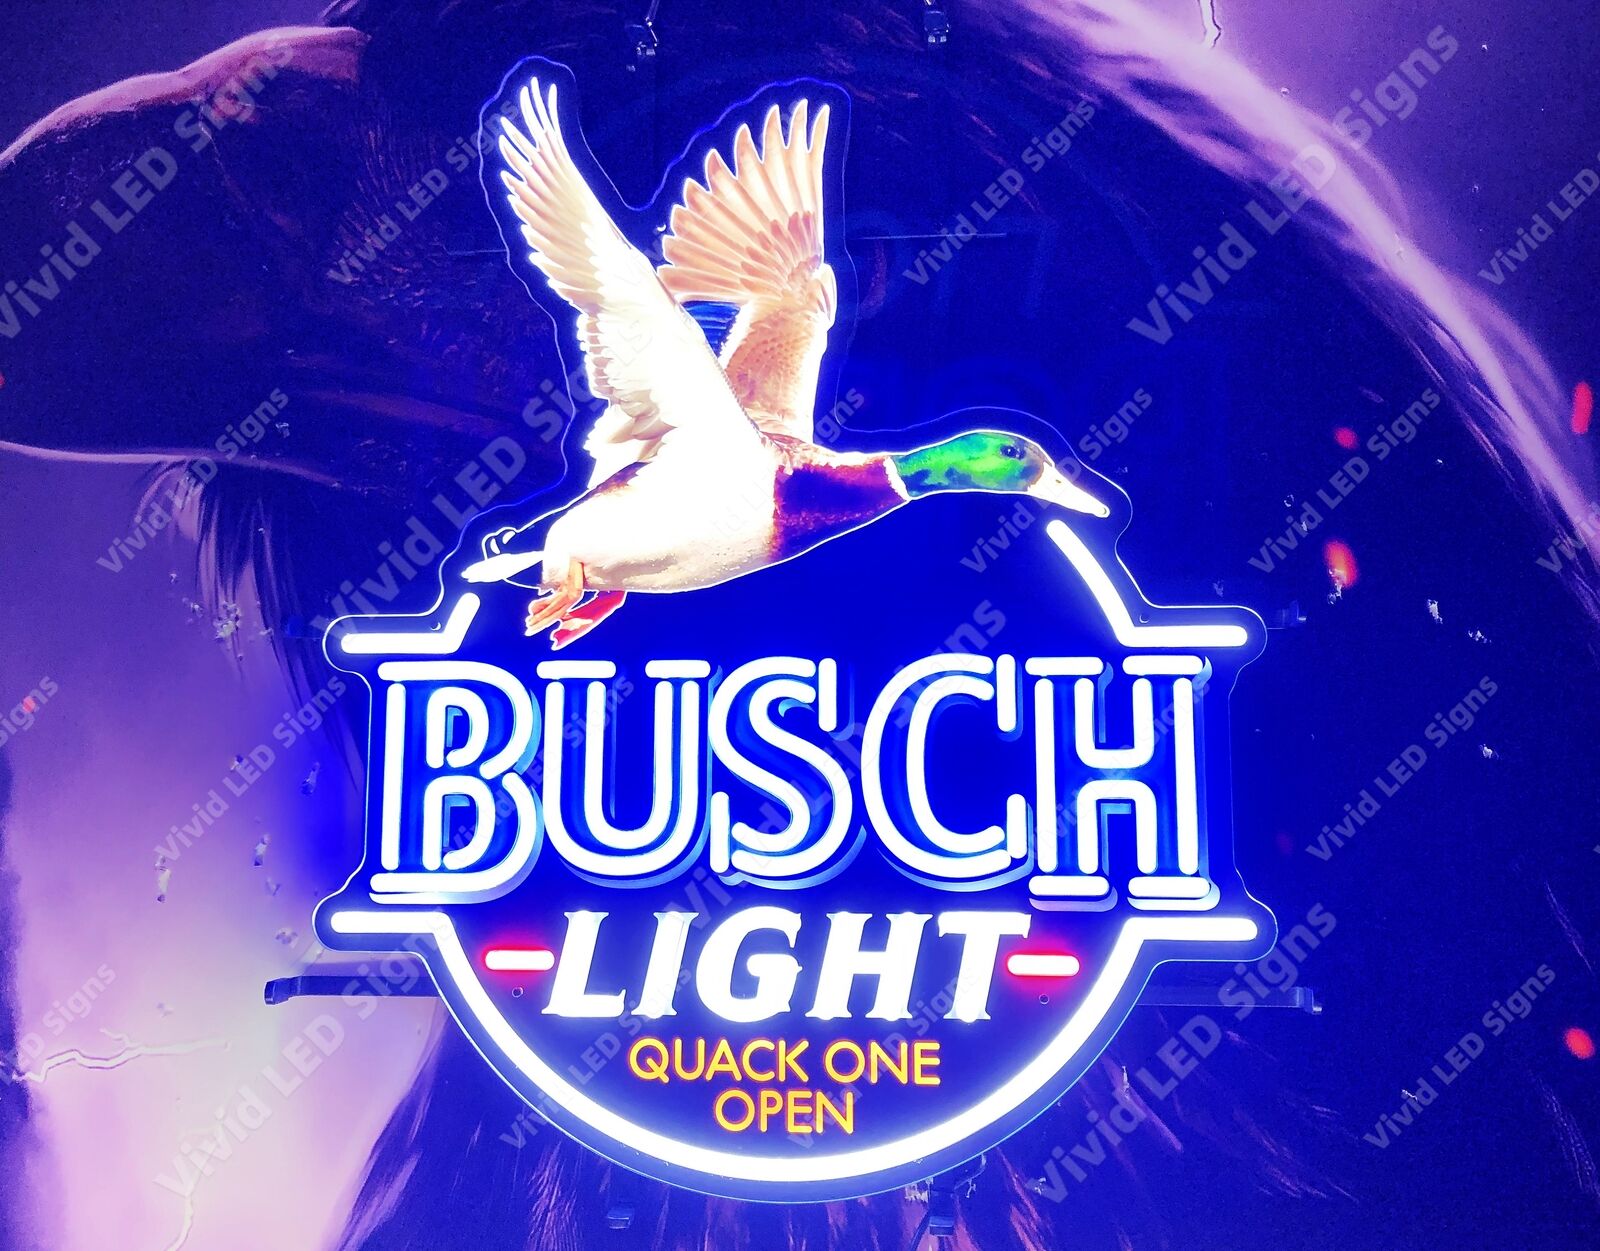 Quack One Open Flying Duck Beer Vivid LED Neon Sign Light Lamp With Dimmer